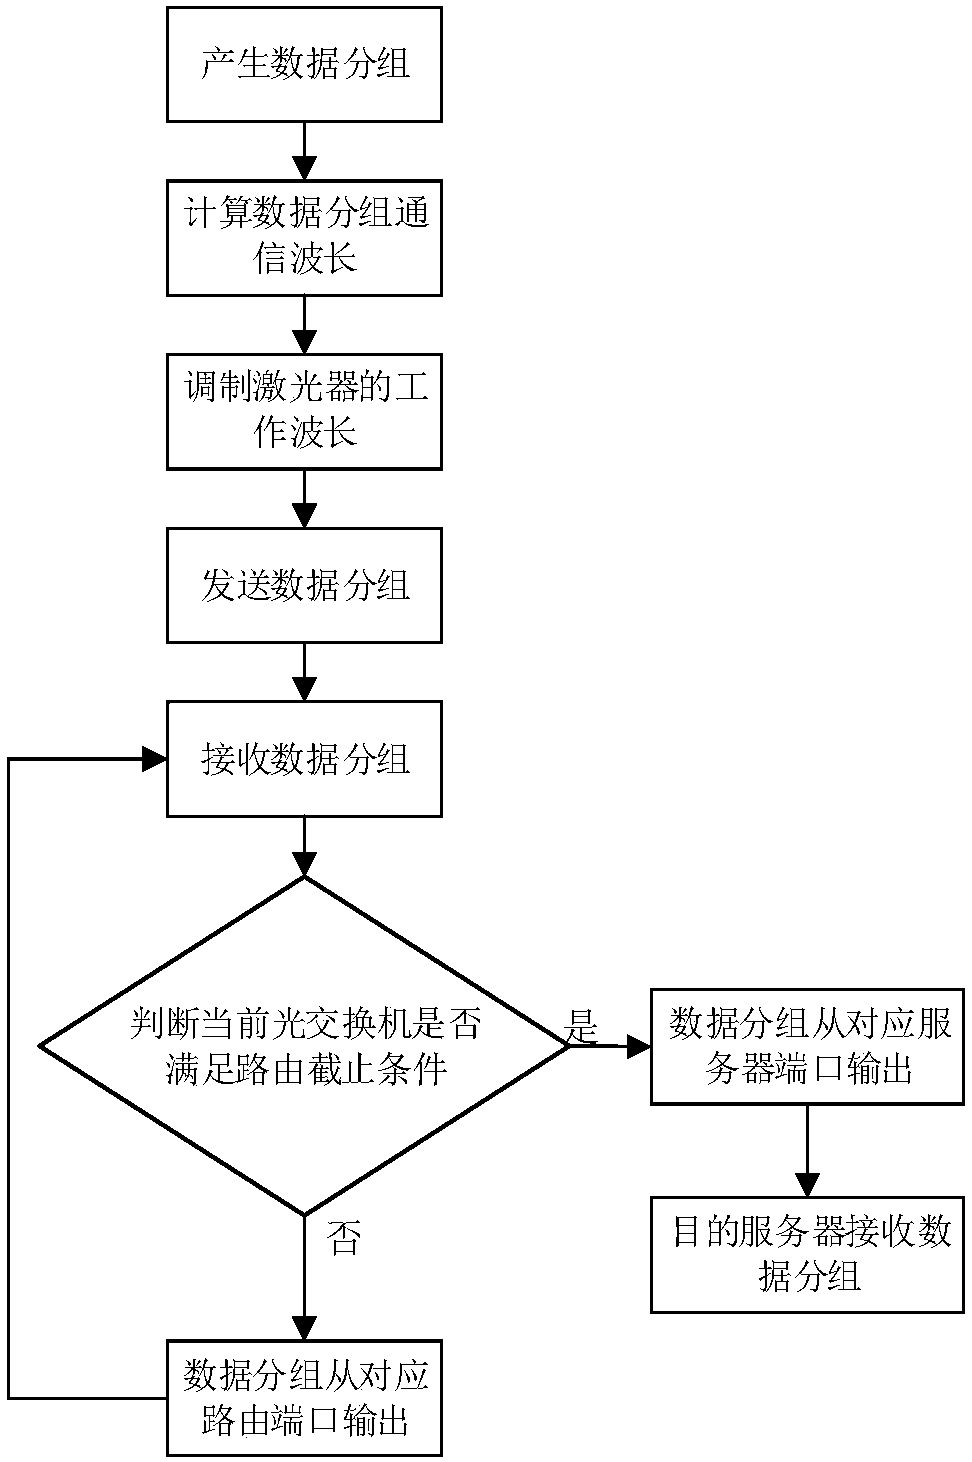 A highly scalable data center all-optical interconnection network system and communication method